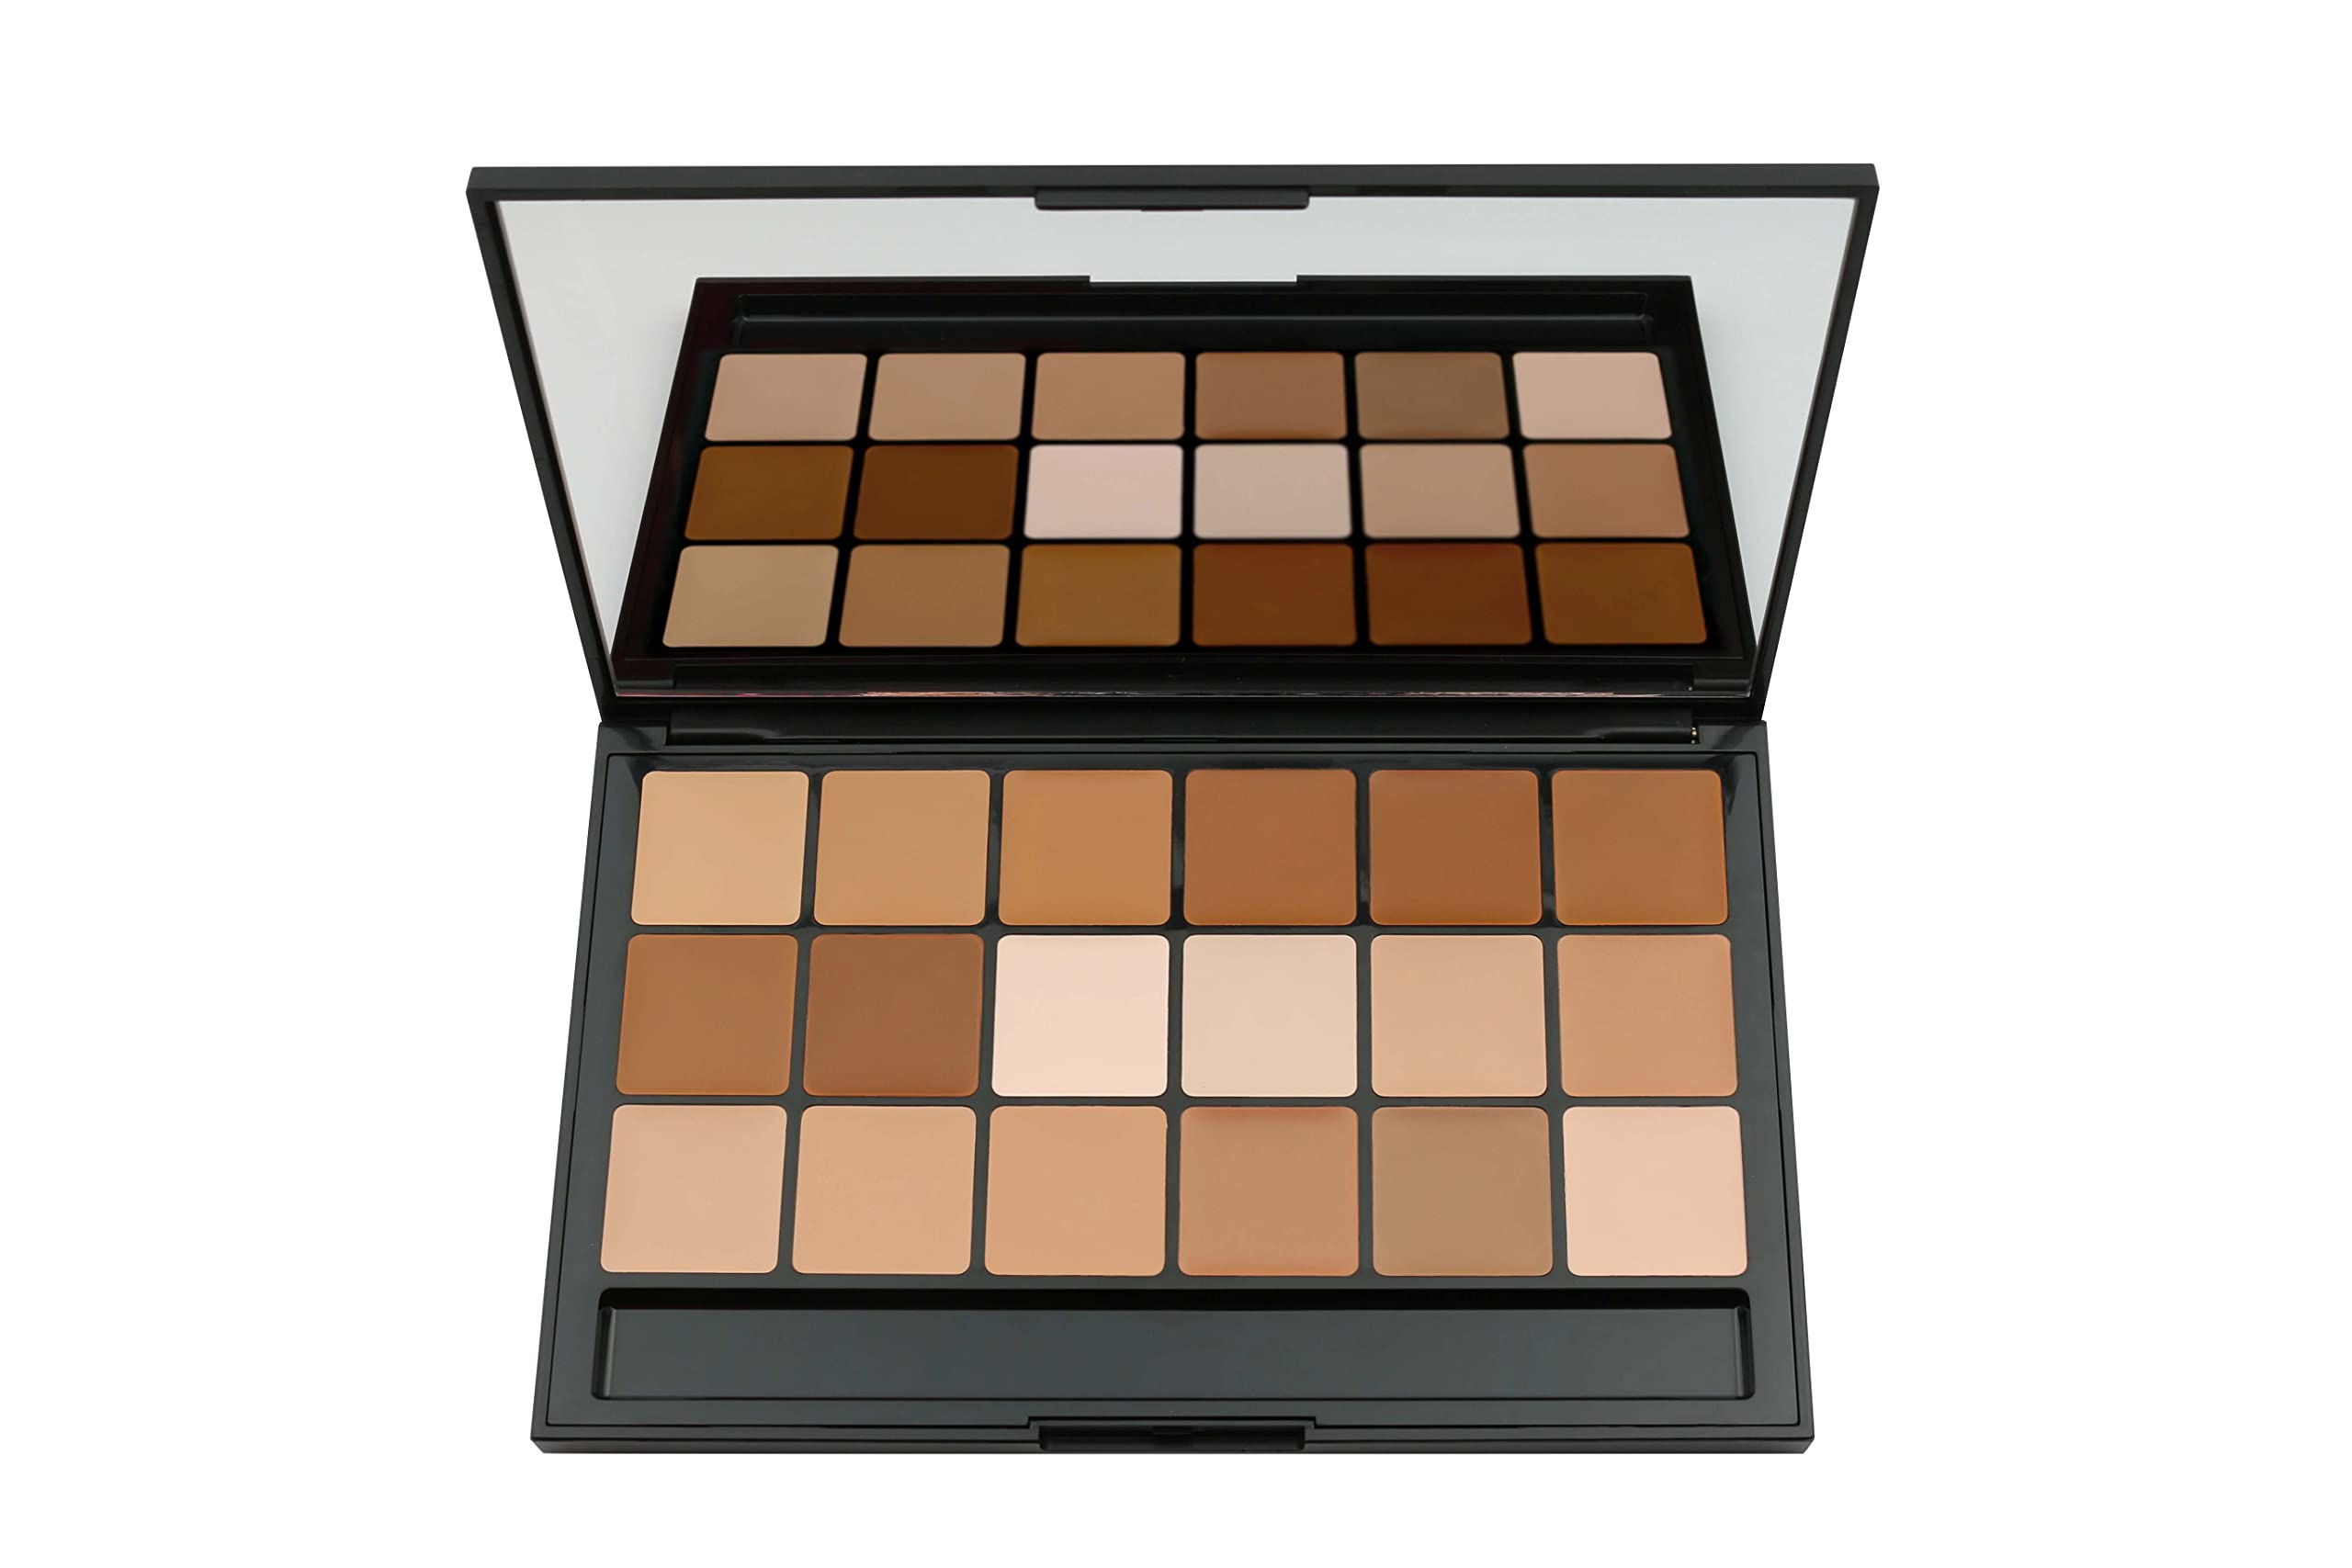 RCMA Vincent Kehoe 18 Part Foundation/Concealer Palette #11, HD Look, Perfect Finish, Professional Makeup for Movies, Theater or Everyday Use